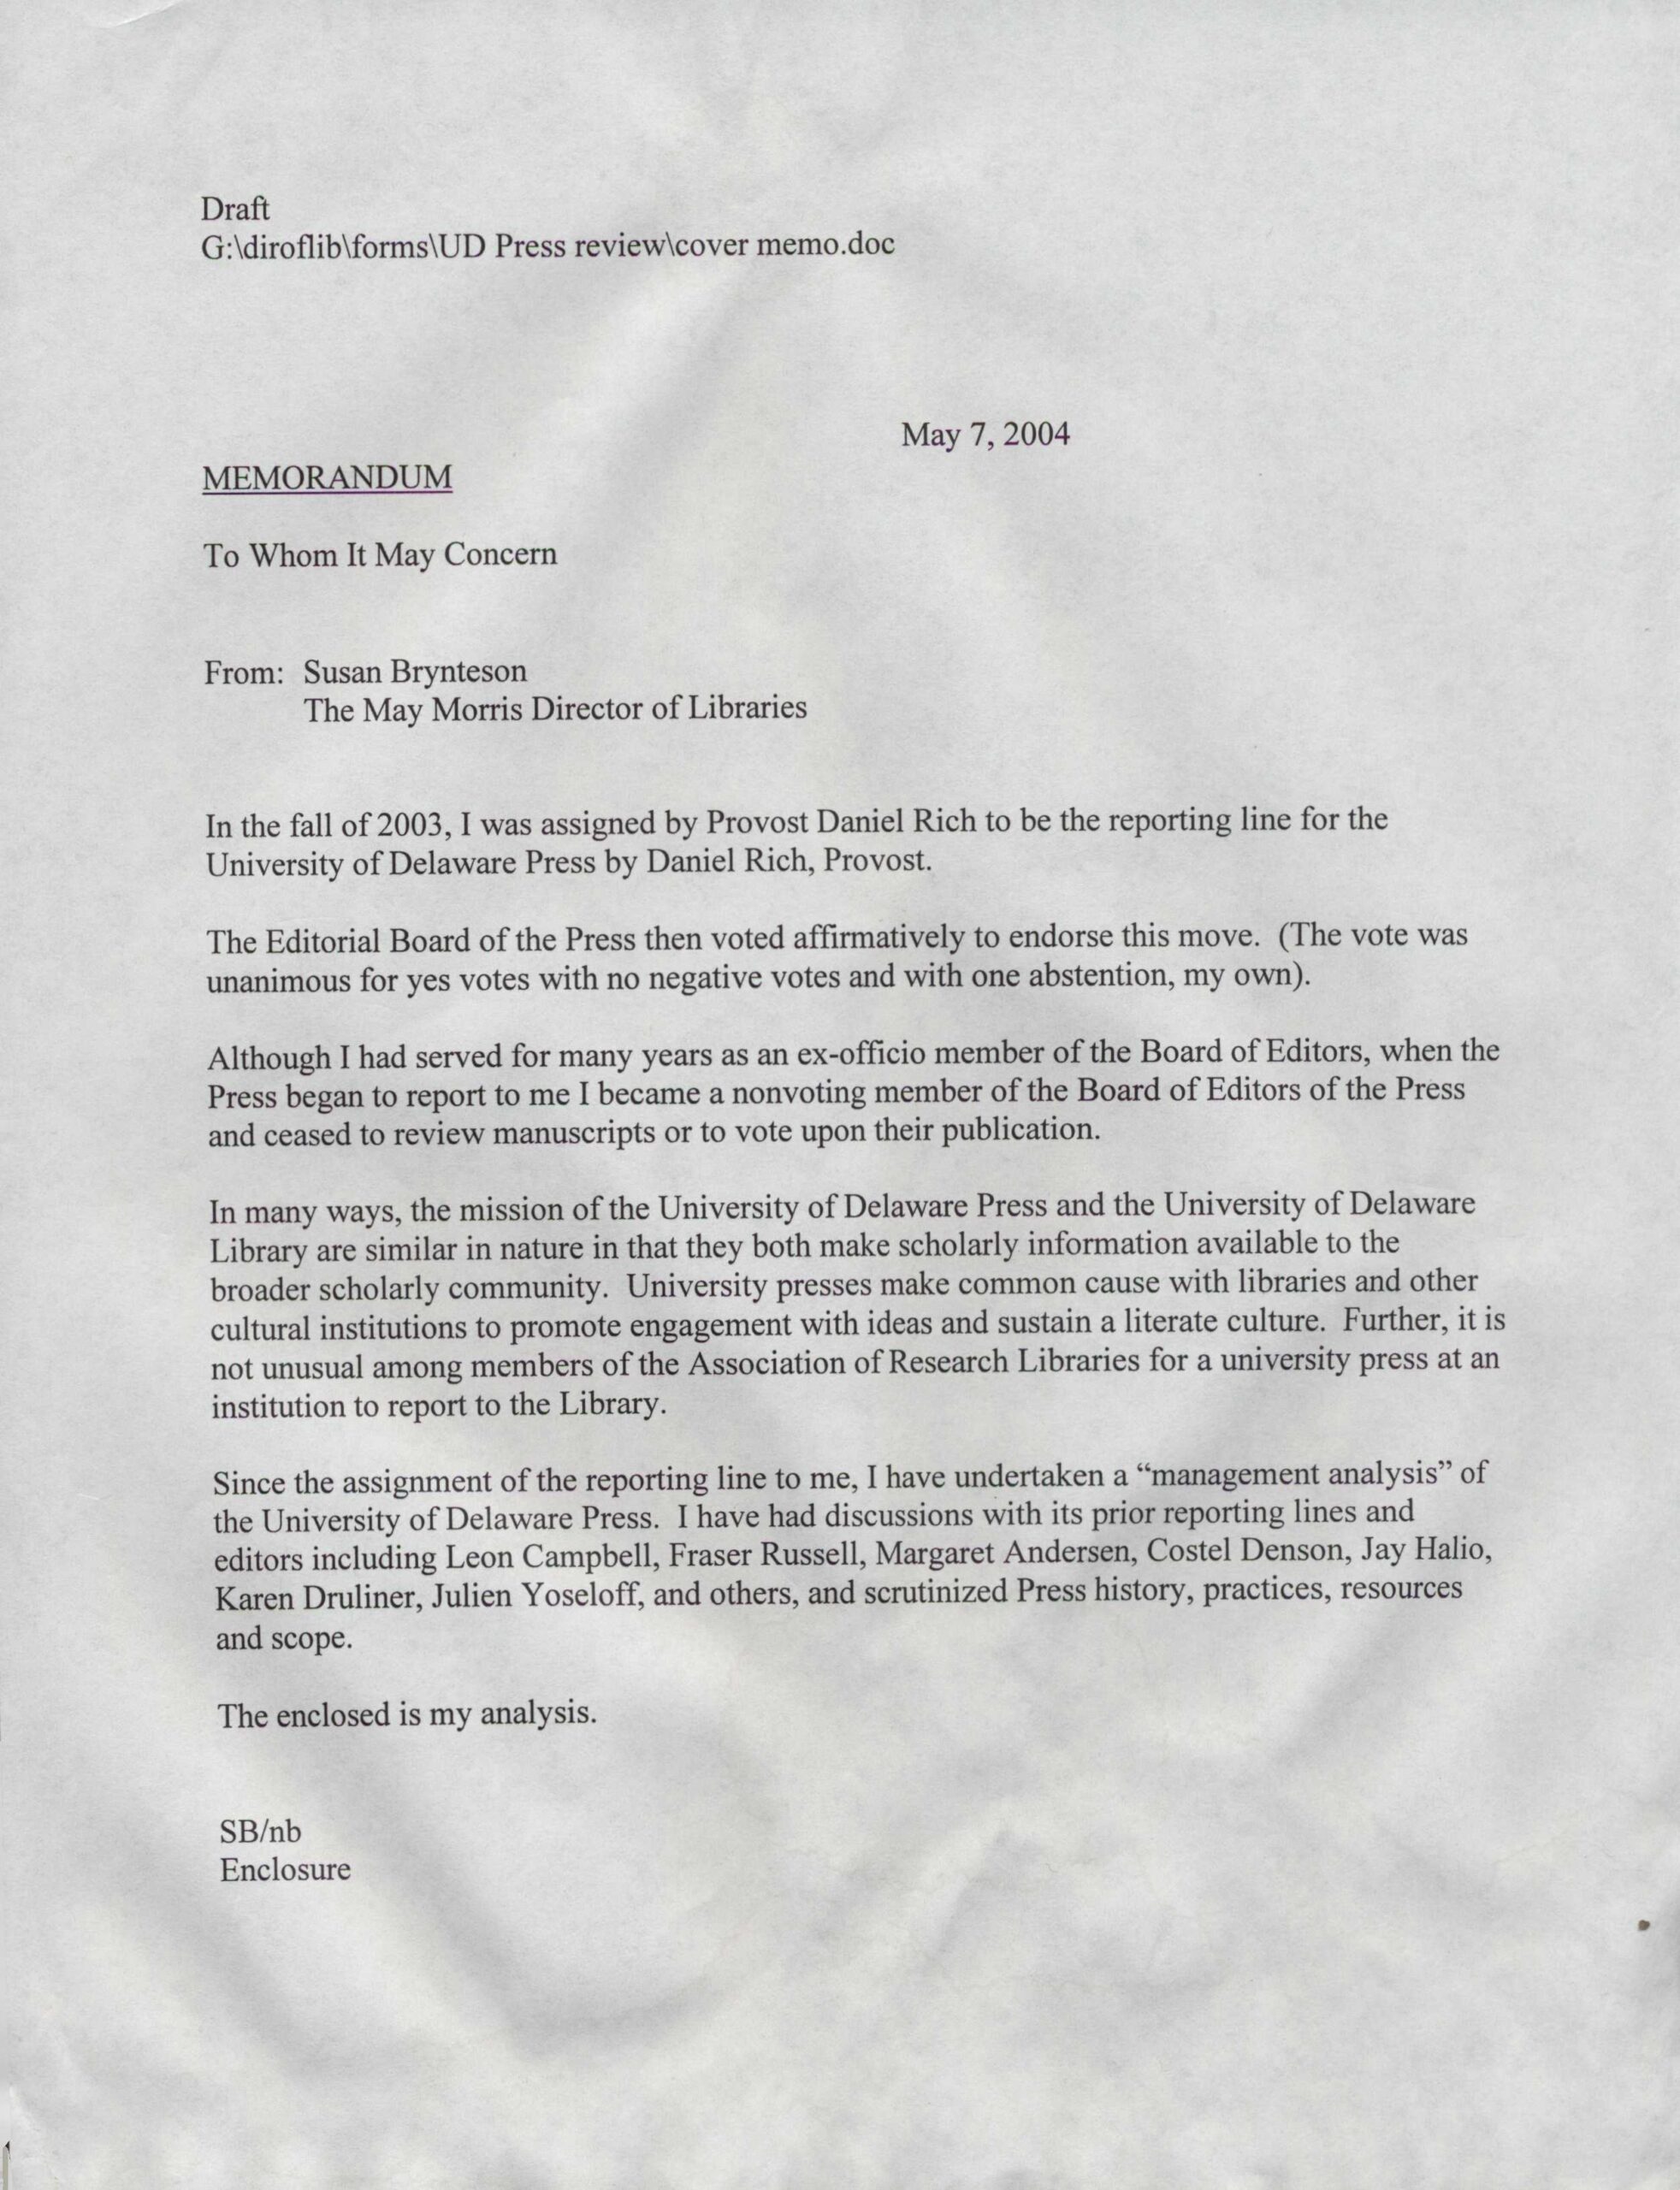 Letter from Susan Brynteson May 7, 2004